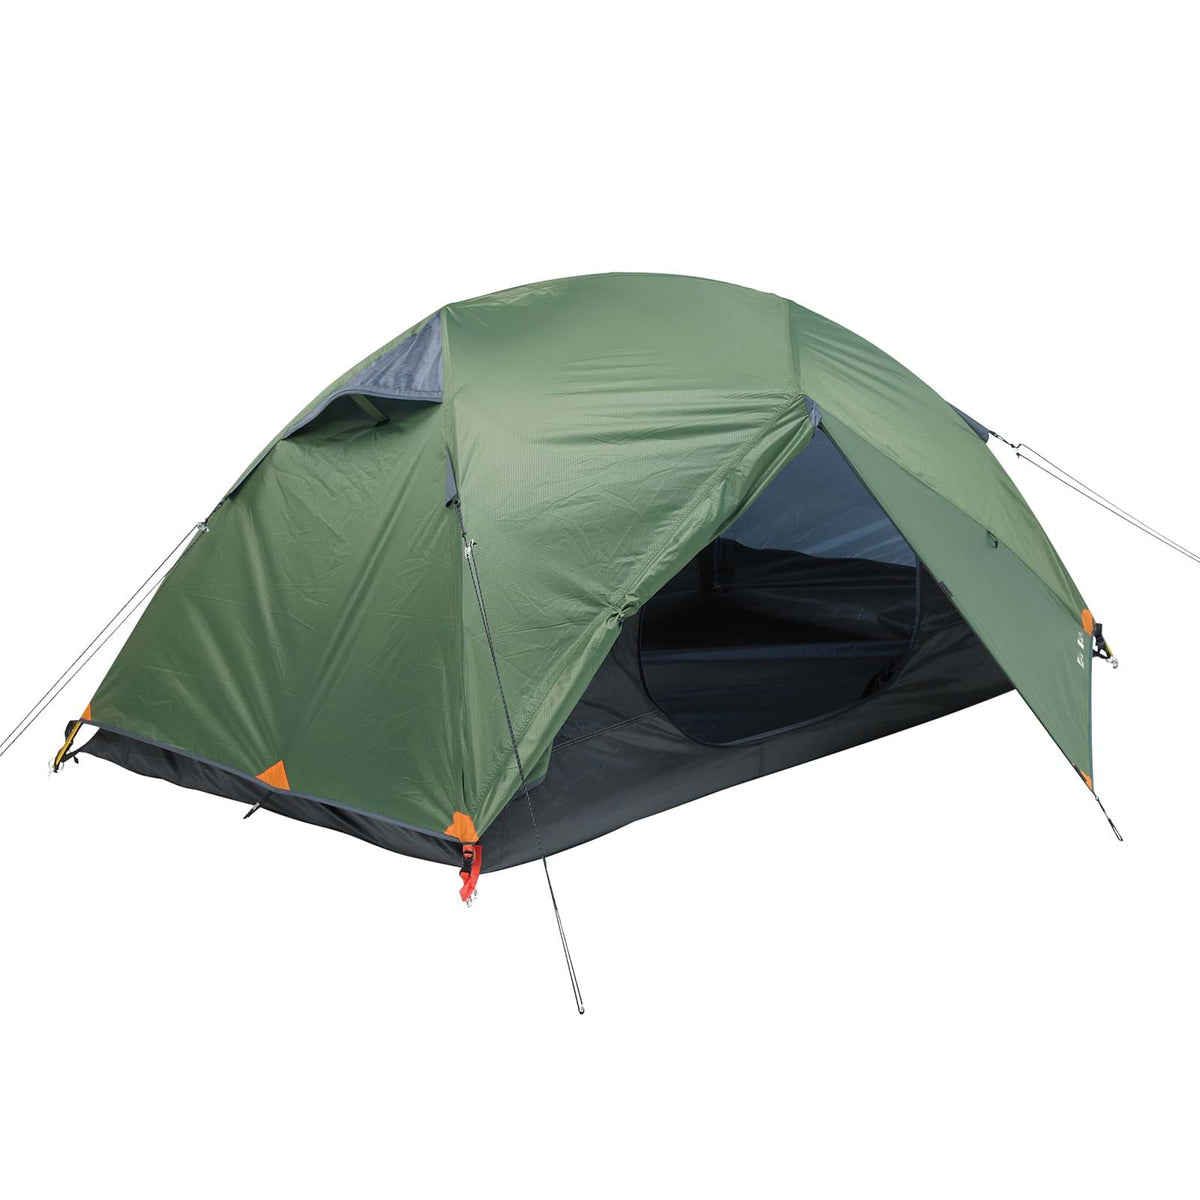 EPE Spartan 3 Person Hiker Tent